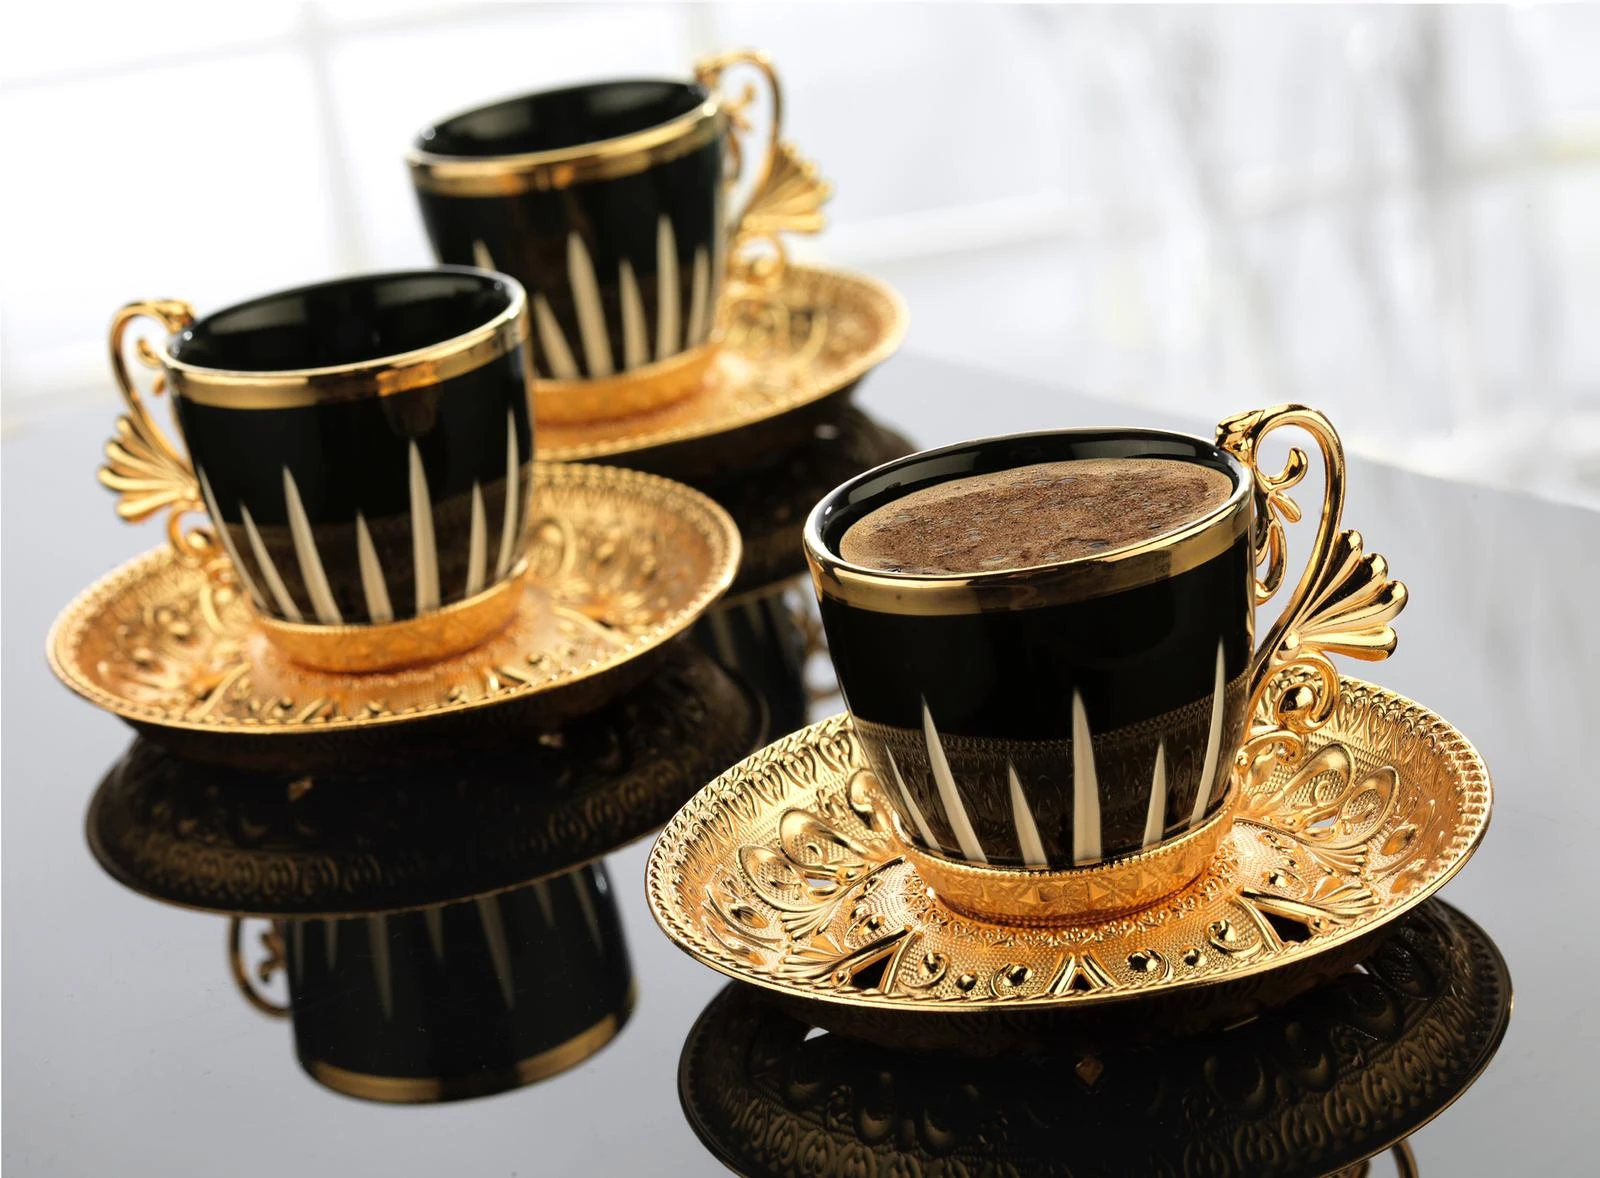 Turkish Coffee Serving Set-Coffee Porcelain Cup&Saucer,Coffee Maker Pot